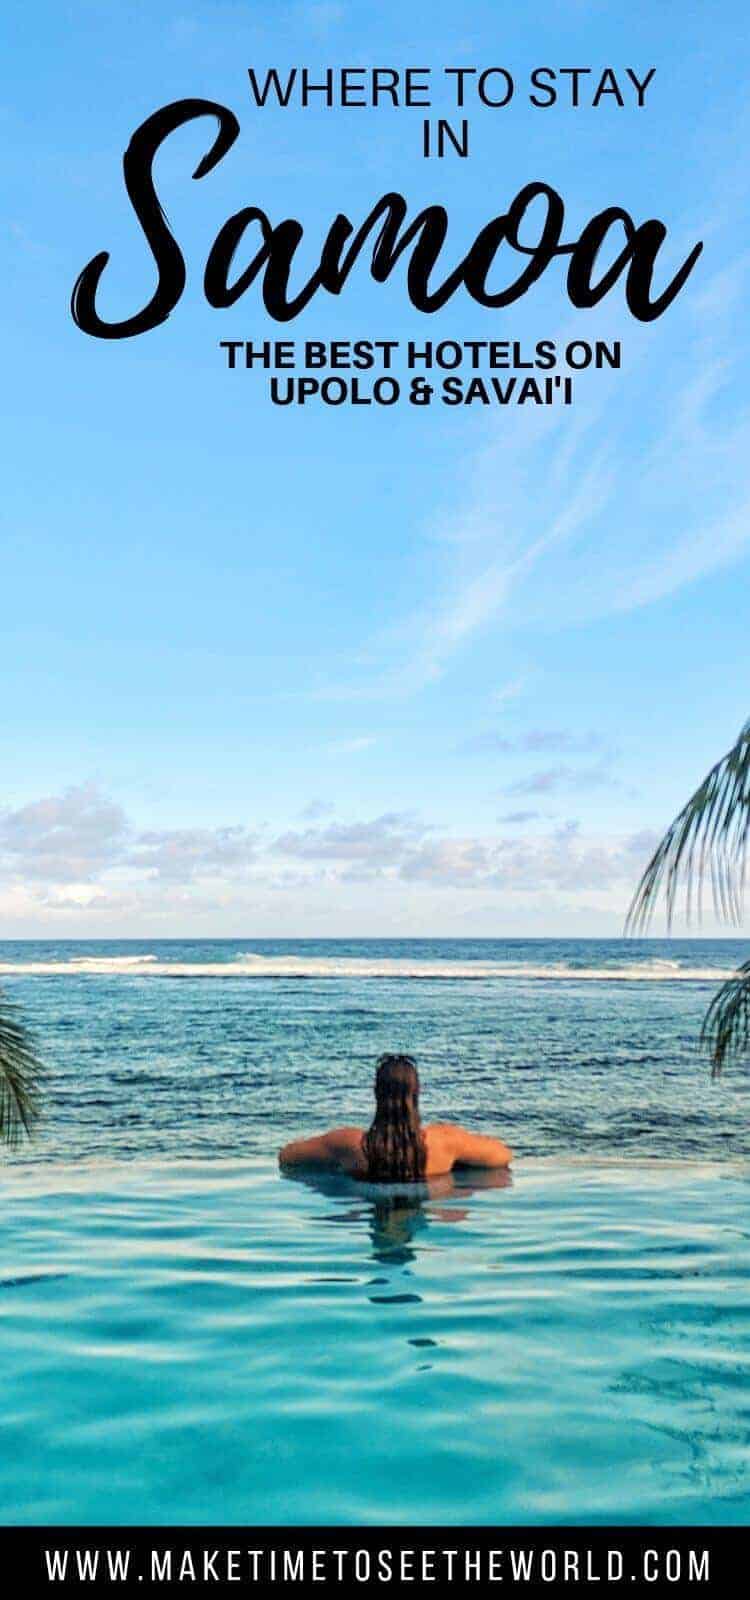 Samoa Accommodation Guide Pin Image with text overlay, woman facing the ocean in an infinity pool, hair down back to the camera